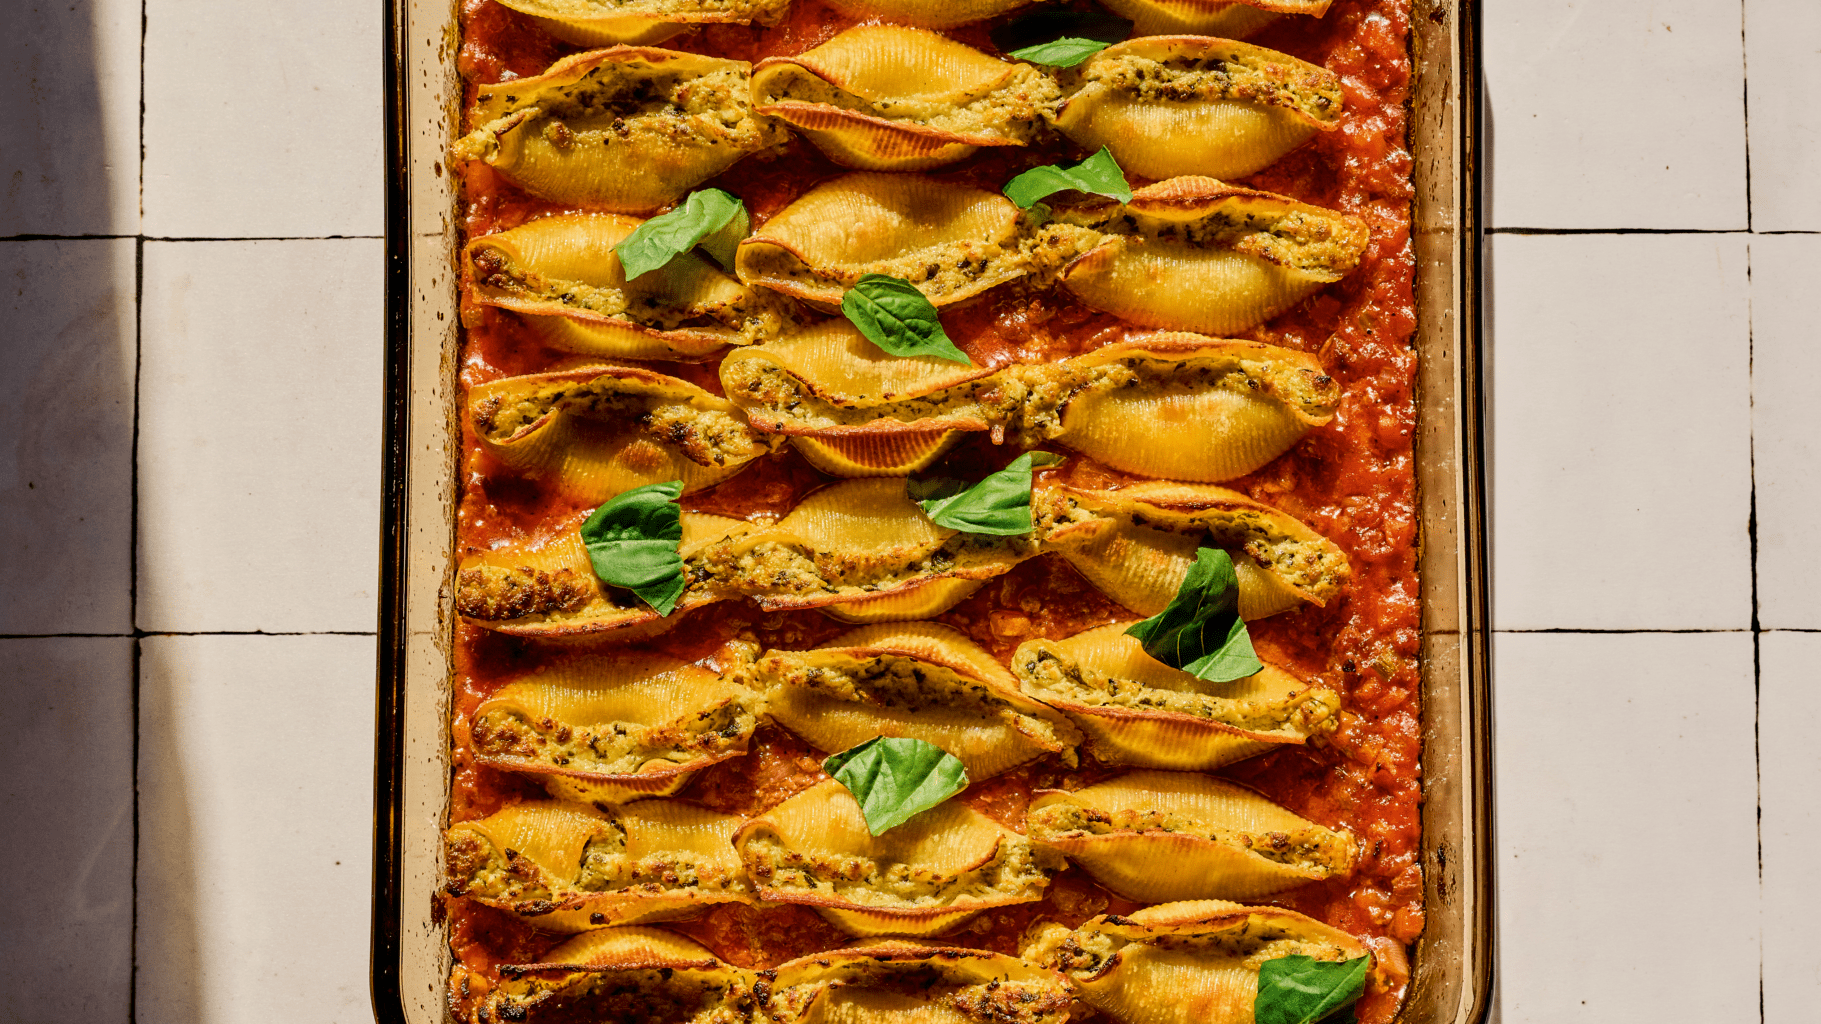 Pesto and Ricotta Stuffed Shells with Tomato Sauce excerpted from Cured by Steve McHugh & Paula Forbes.